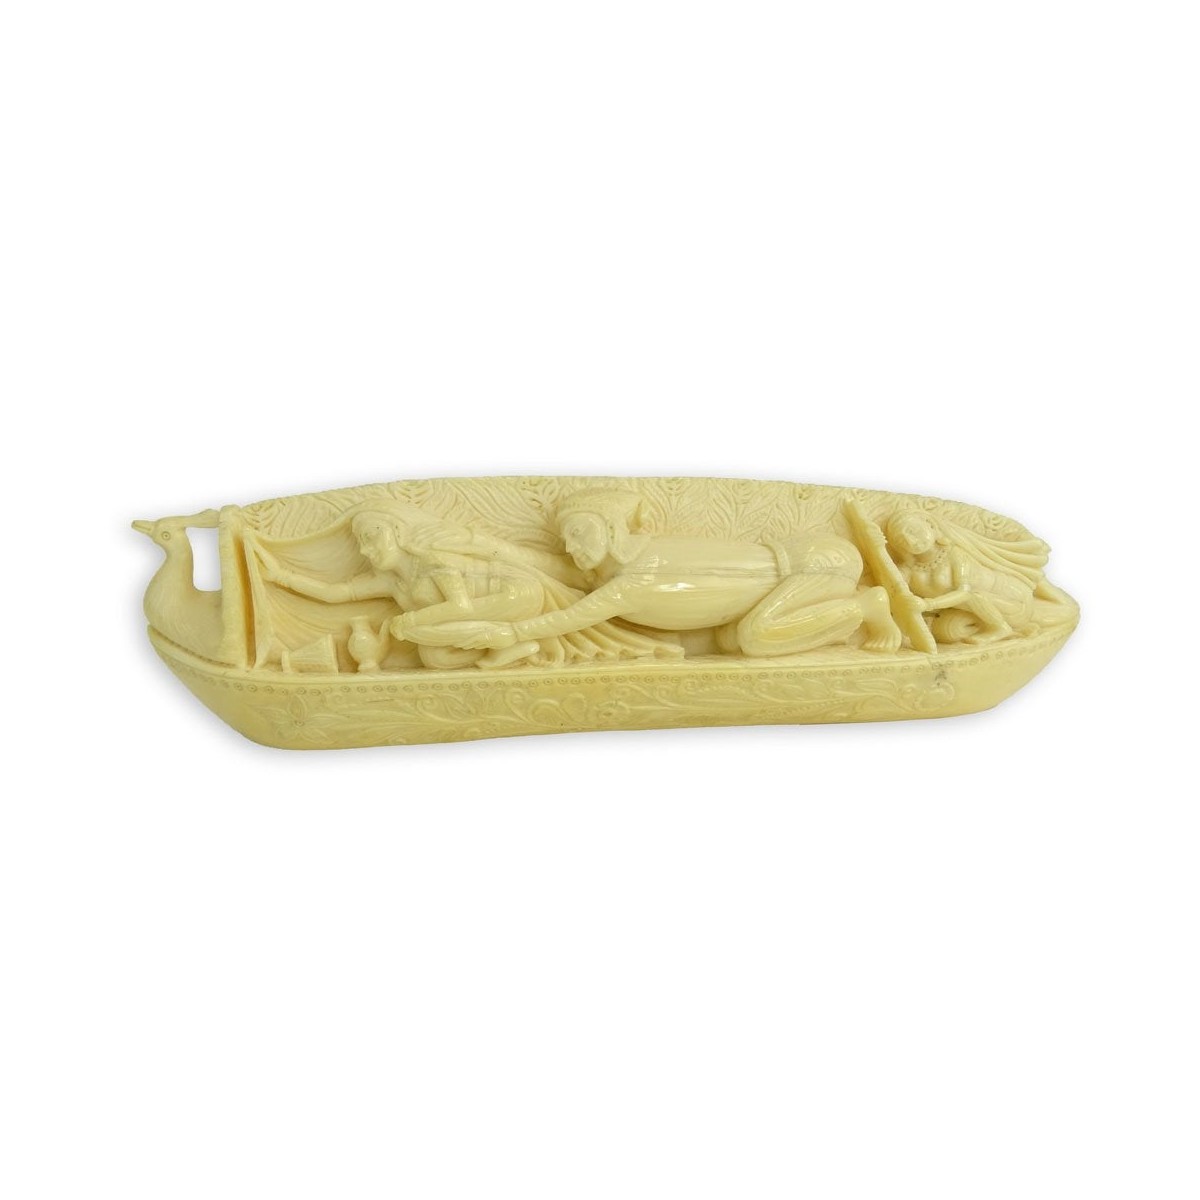 Antique Indian Carving Depicting a Canoe